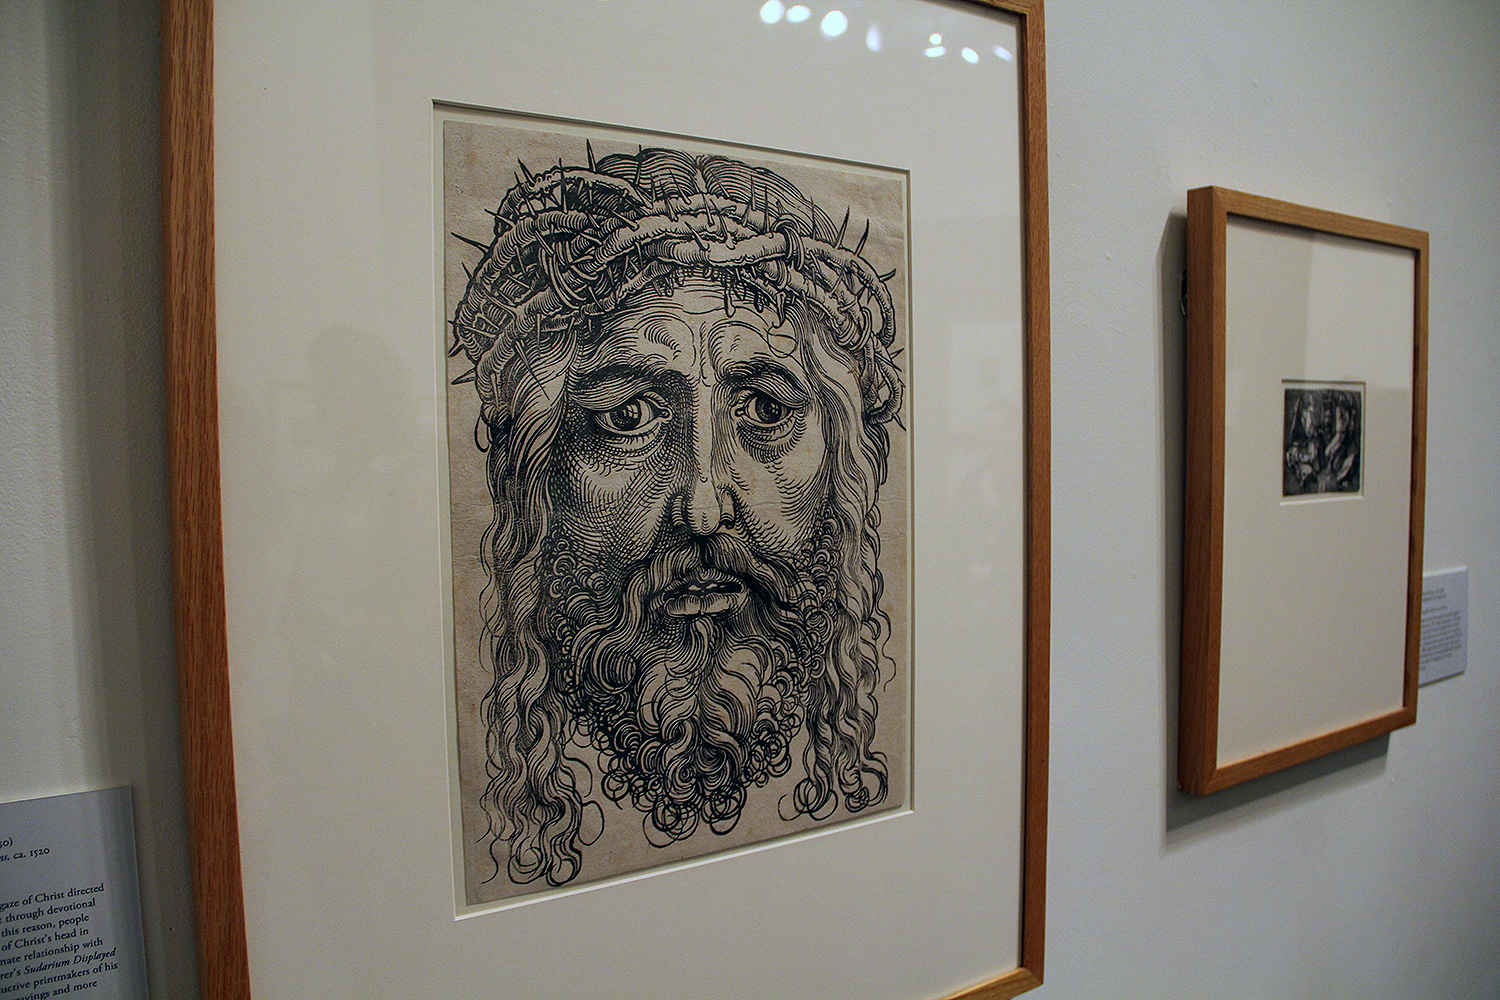 Hans Sebald Beham (German, 1500-1550) created this woodcut of “The Head of Christ Crowned with Thorns” in 1520. At the time, people hung this larger-than-life-sized image of Christ’s head in their private shrines and built an intimate relationship with the print. Beham made about 270 engravings and more than 1,000 woodcuts during his career.  